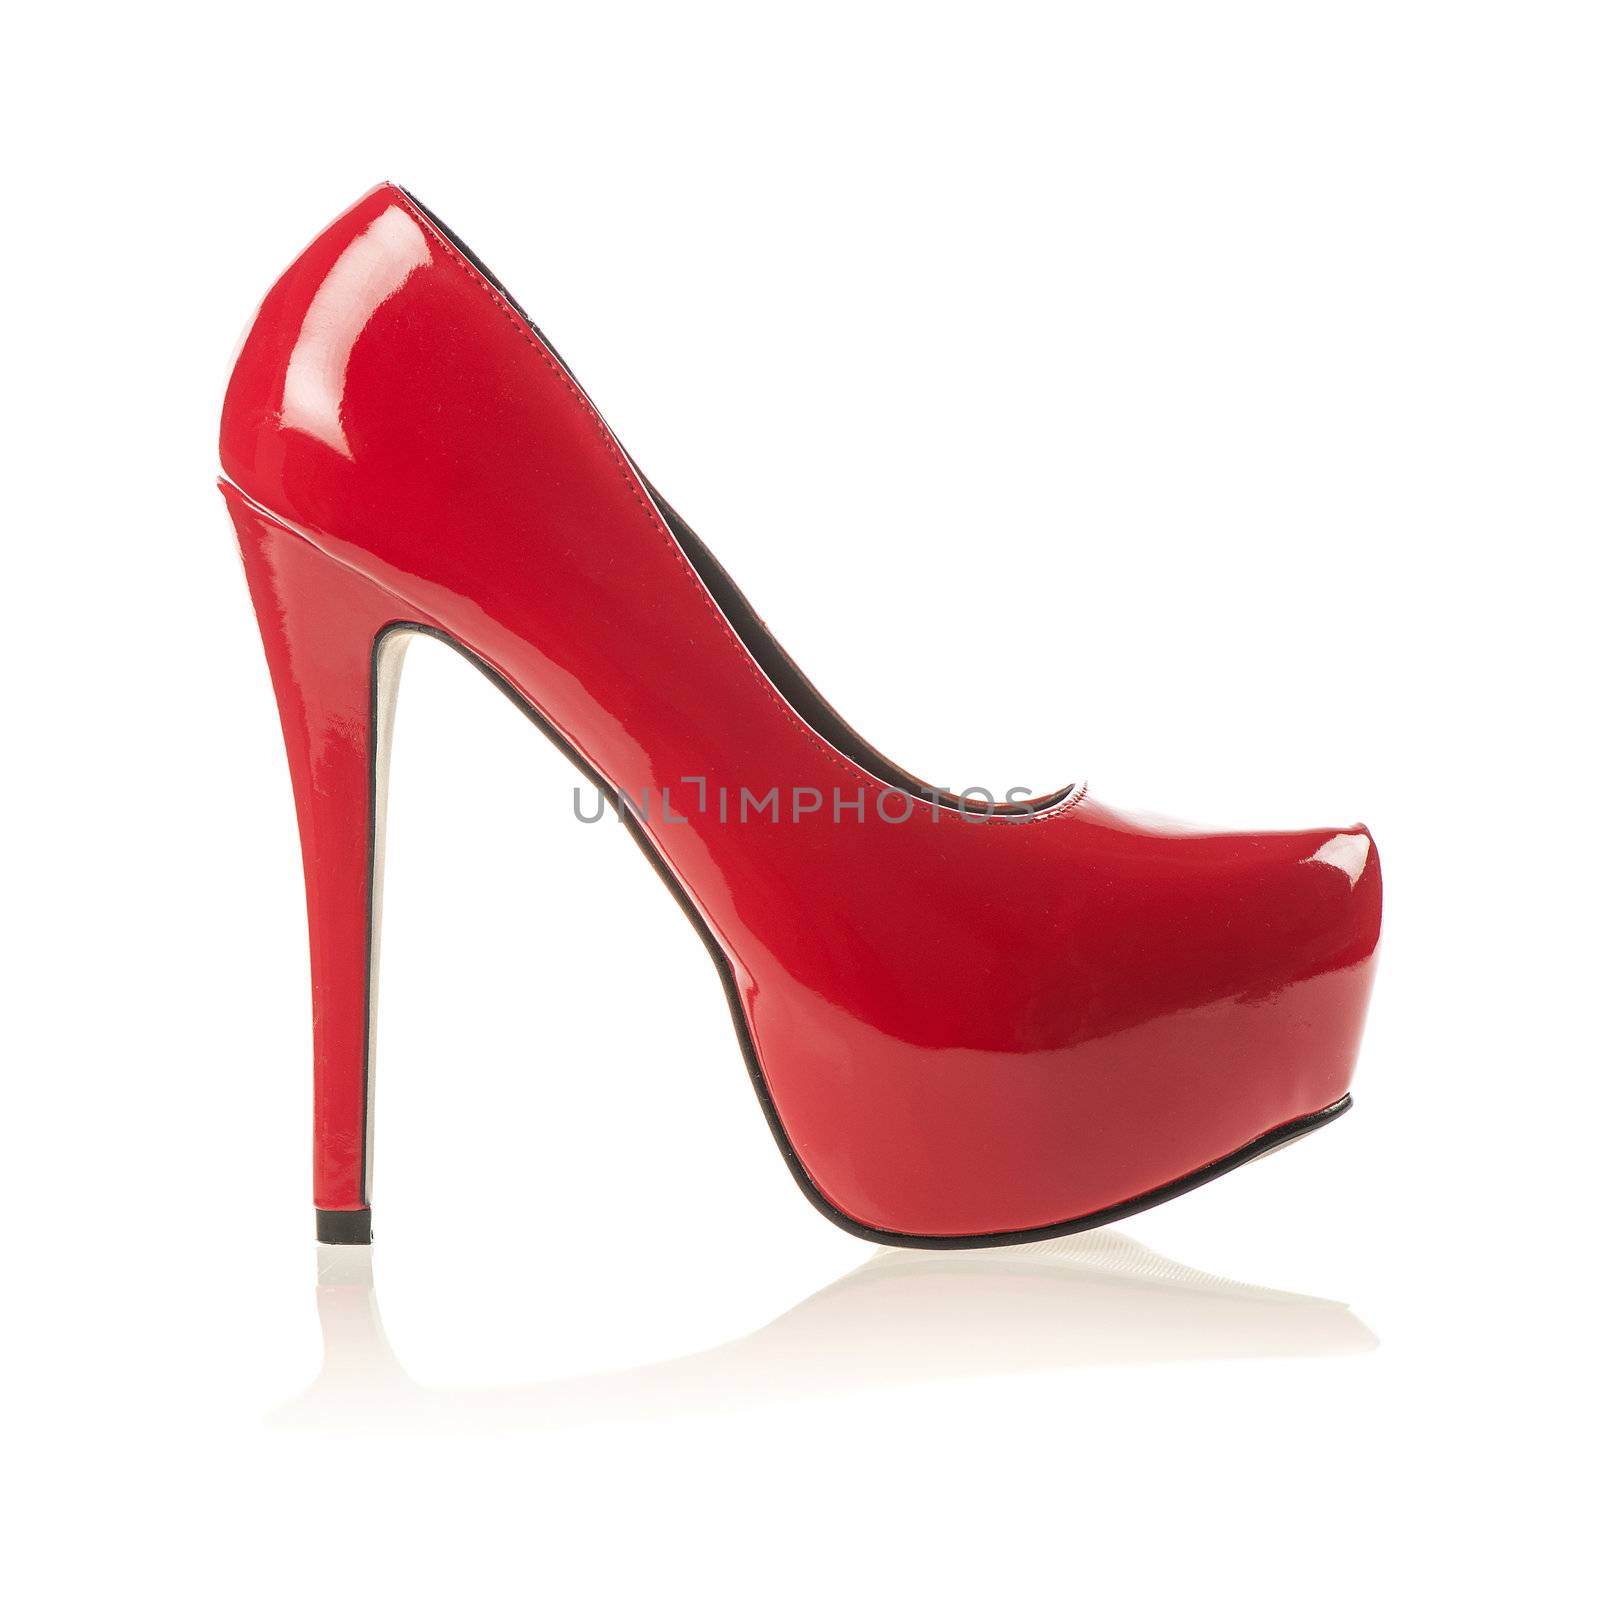 High Heels with inner platform sole, red patent leather